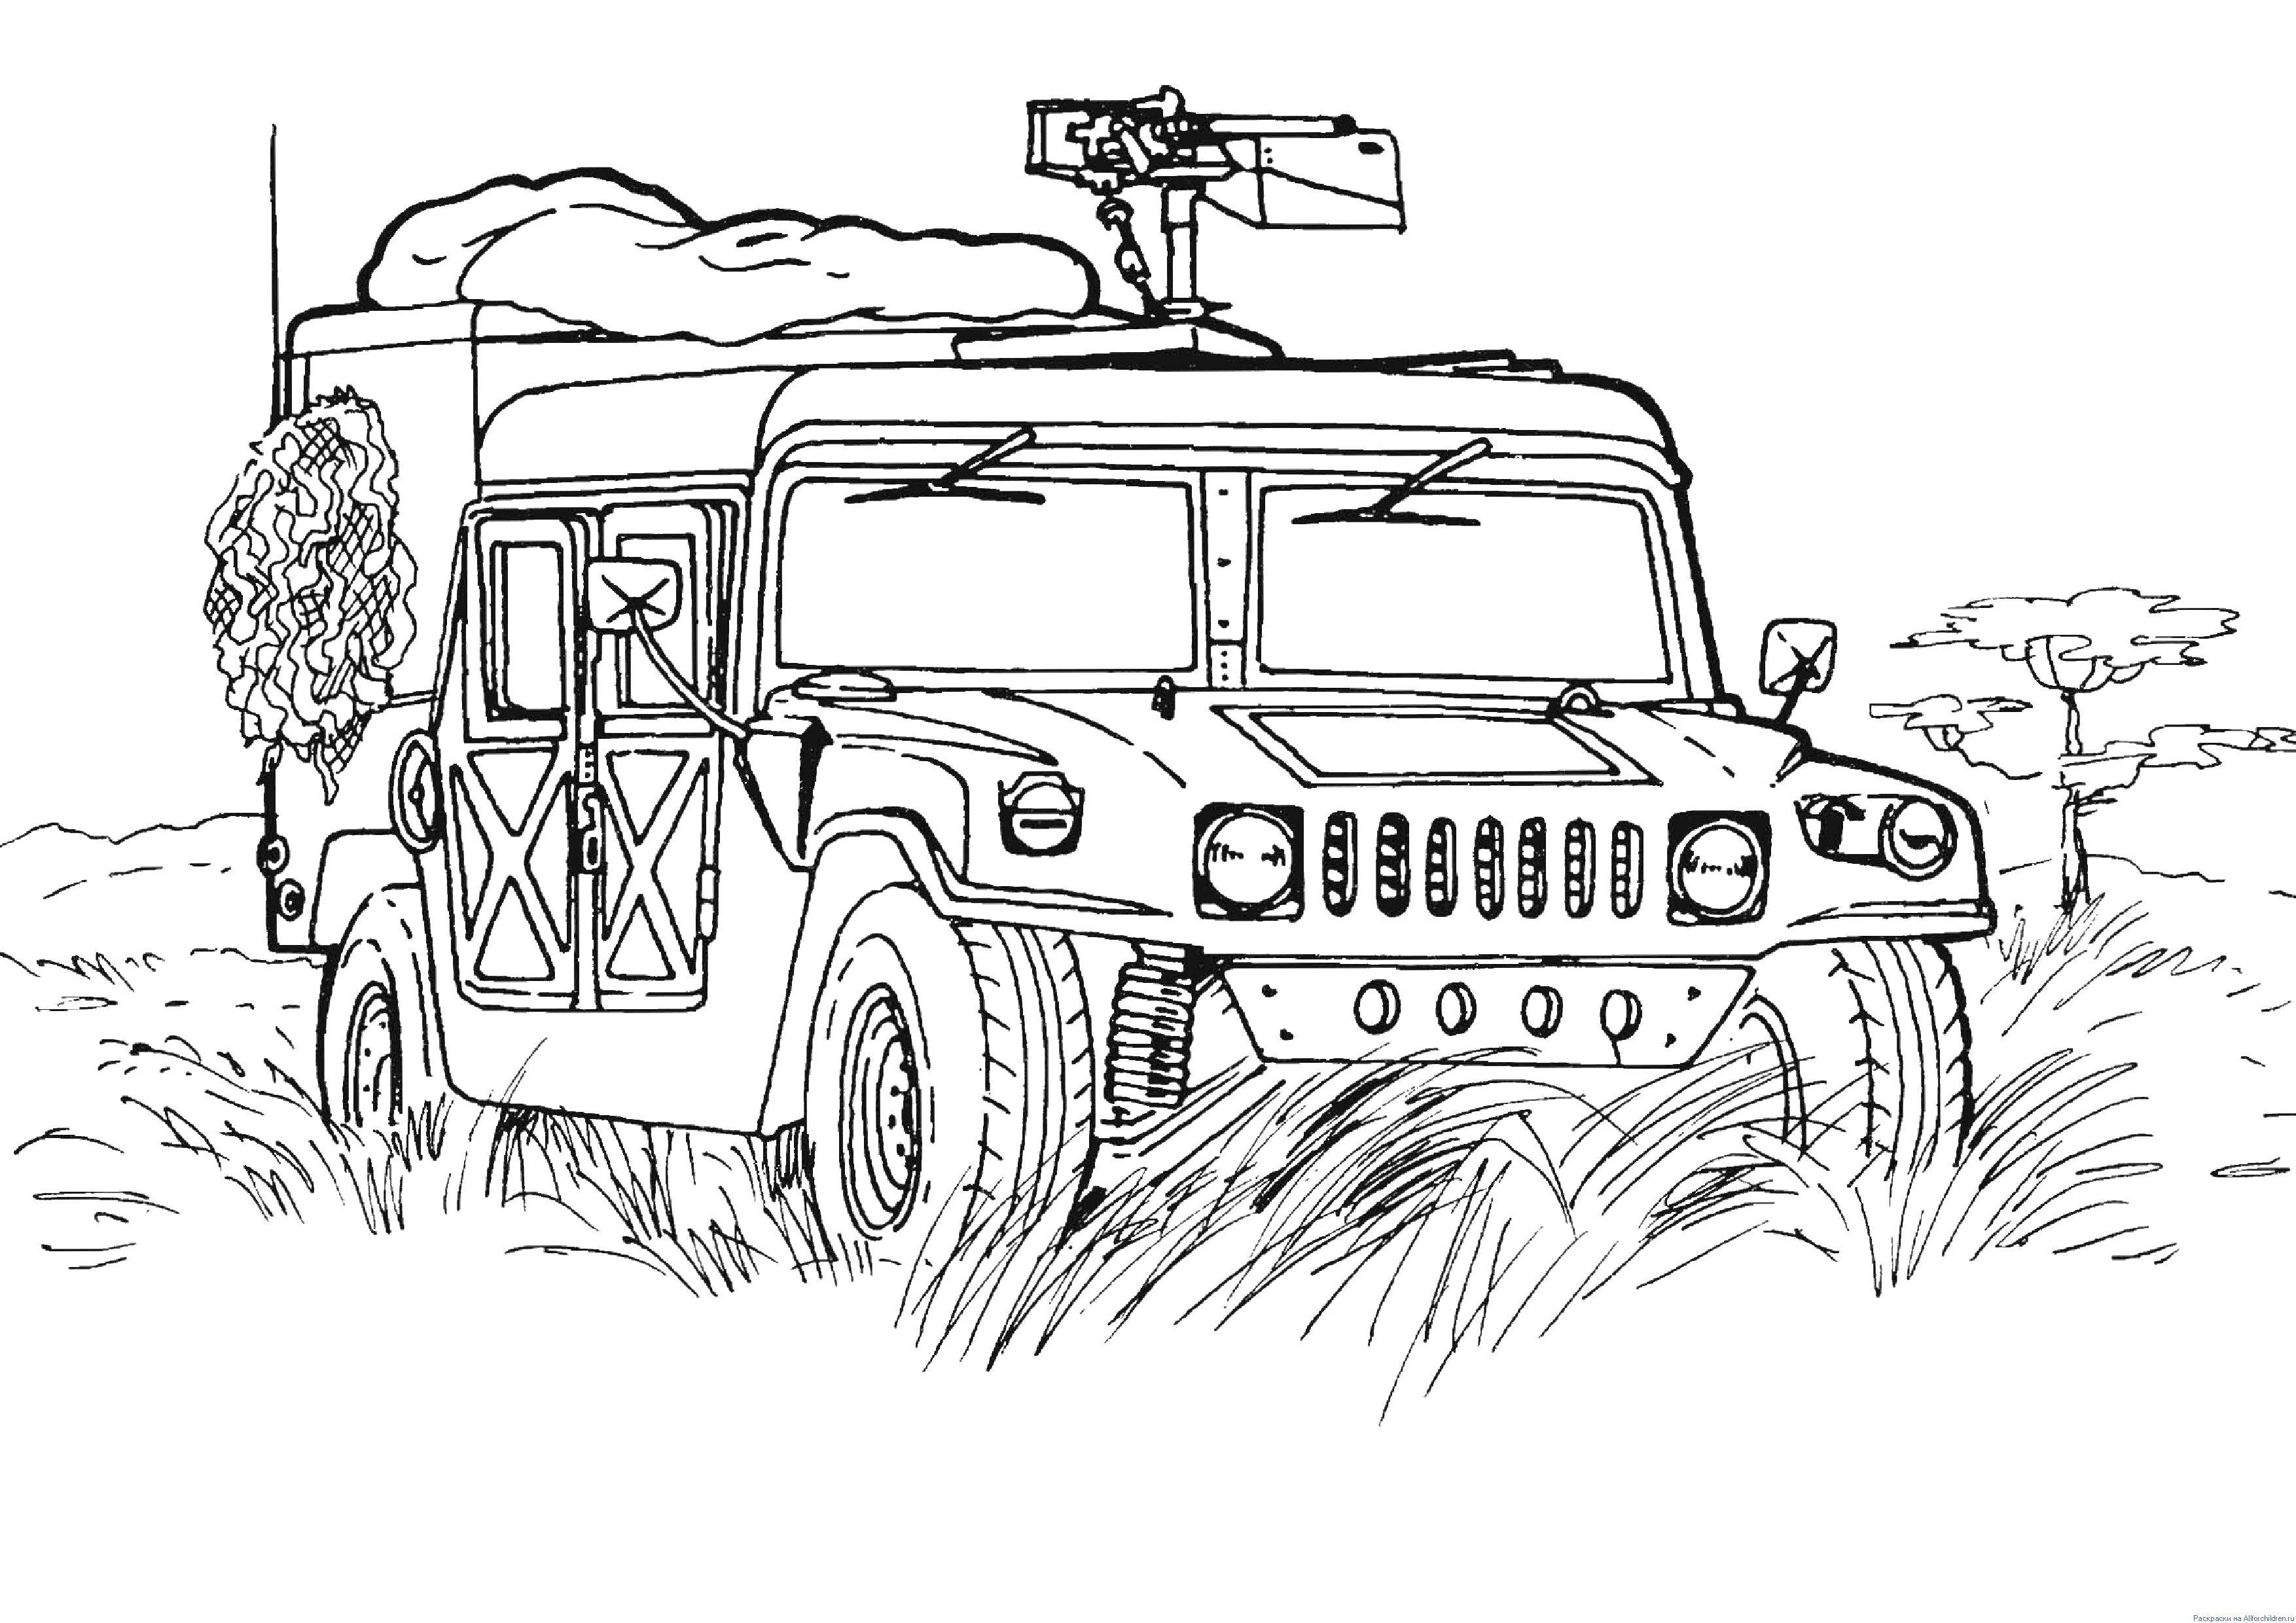 Coloring Military jeep. Category machine . Tags:  Jeep, car.